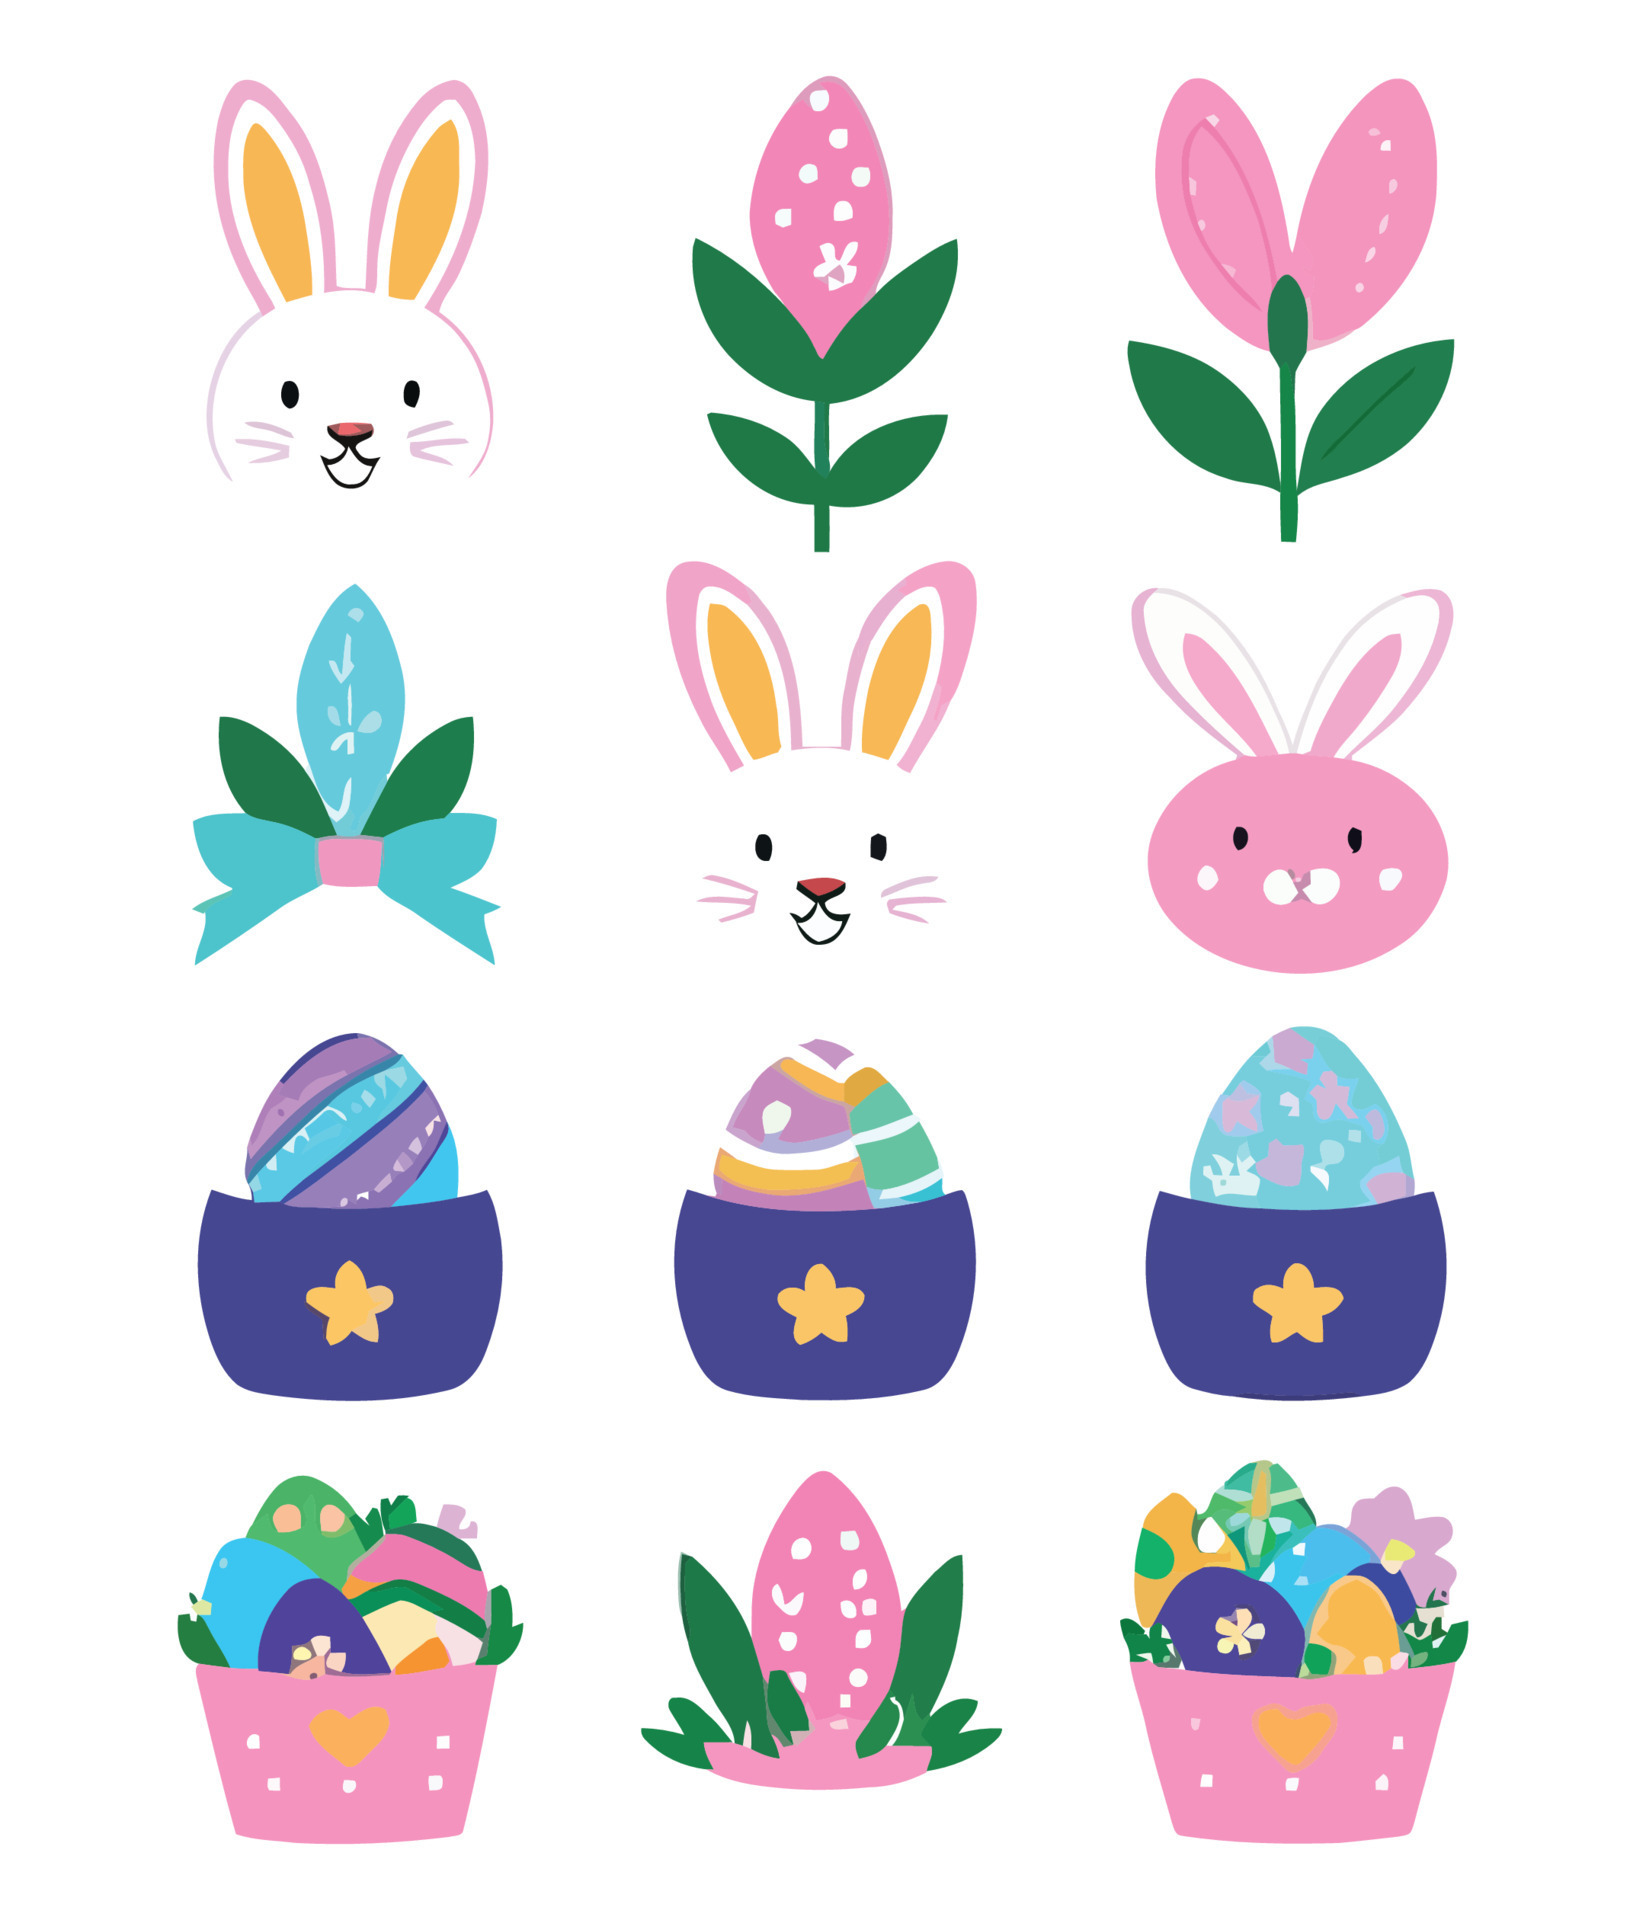 Springtime Delight, Adorable Easter Bunny and Colorful Eggs Vector Illustrations for Kids and Adults to Celebrate the Season's Joy. Adobe Illustrator Artwork 22421473 Vector Art at Vecteezy